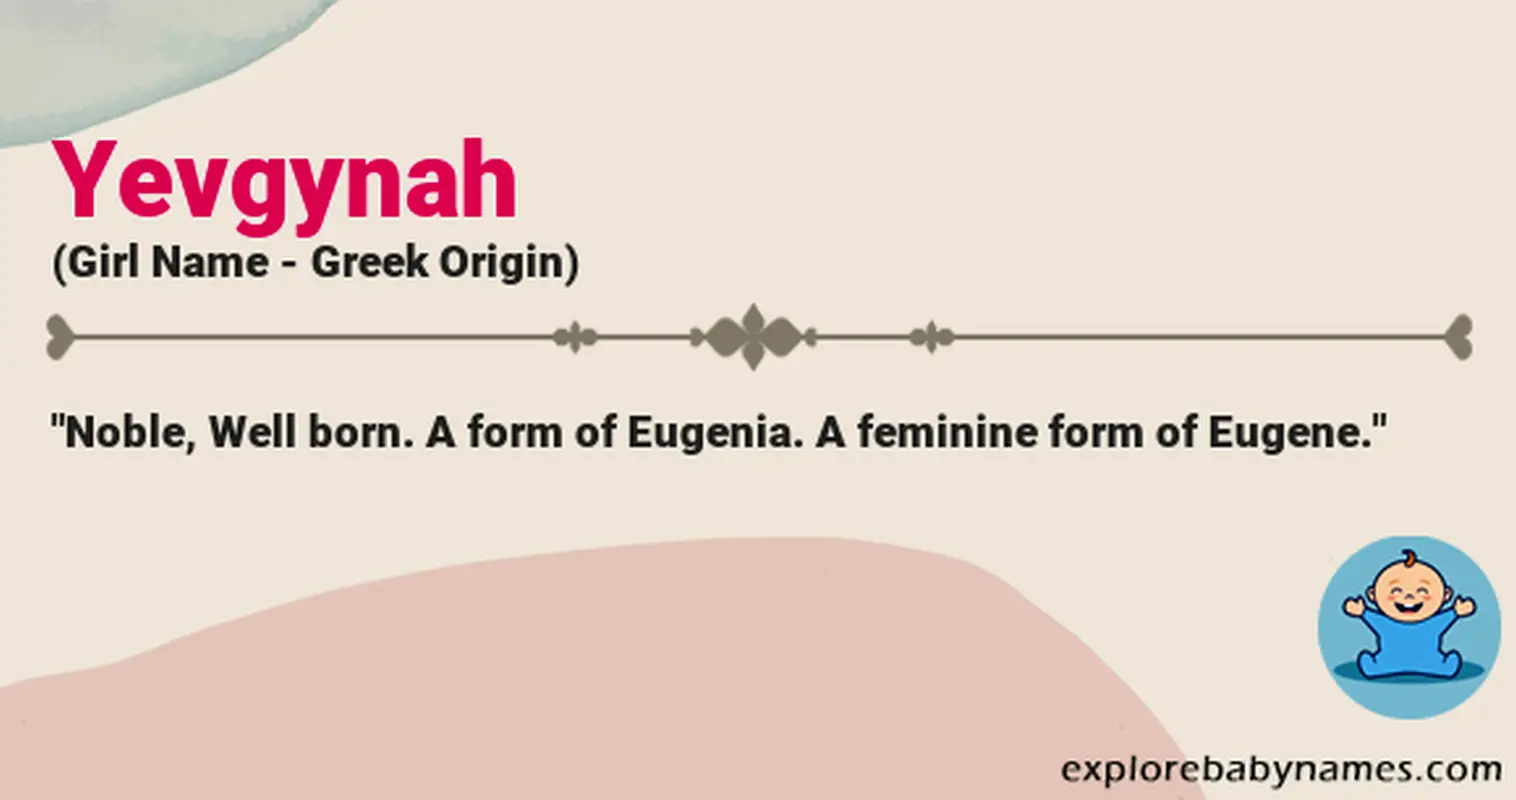 Meaning of Yevgynah